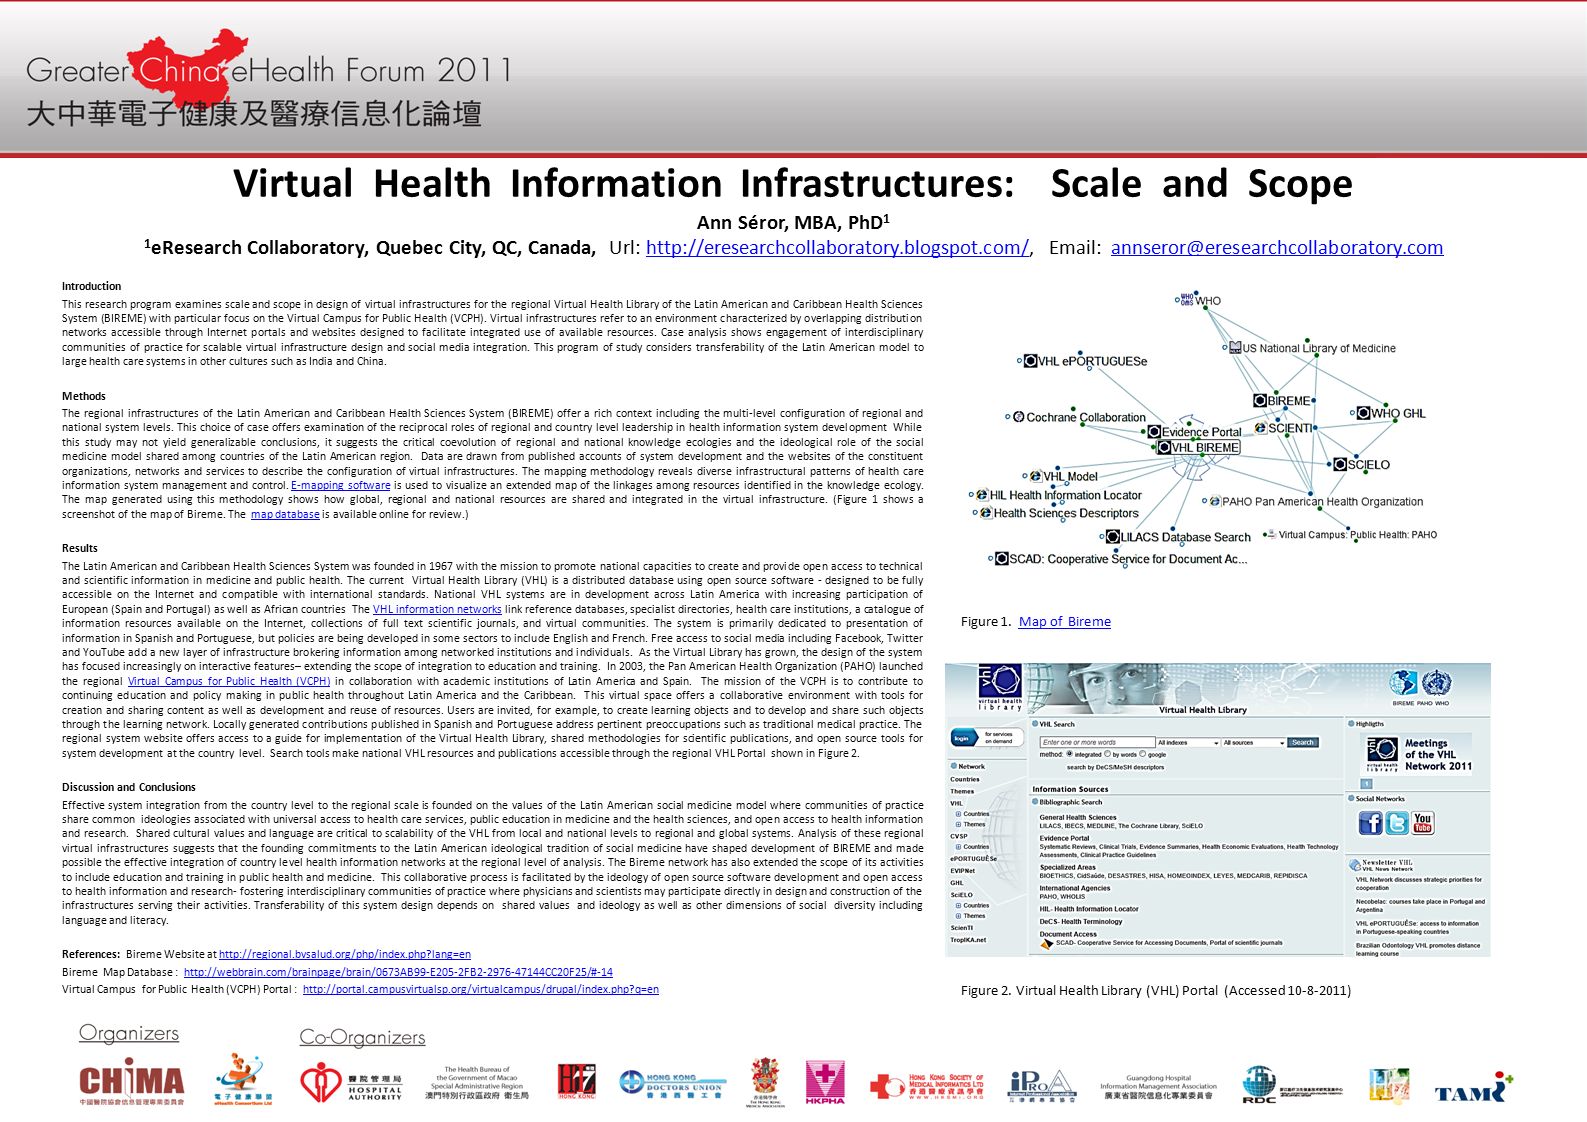 Virtual Health Information Infrastructures: Scale and Scope Ann Séror, MBA, PhD 1 1 eResearch Collaboratory, Quebec City, QC, Canada, Url:     Introduction This research program examines scale and scope in design of virtual infrastructures for the regional Virtual Health Library of the Latin American and Caribbean Health Sciences System (BIREME) with particular focus on the Virtual Campus for Public Health (VCPH).